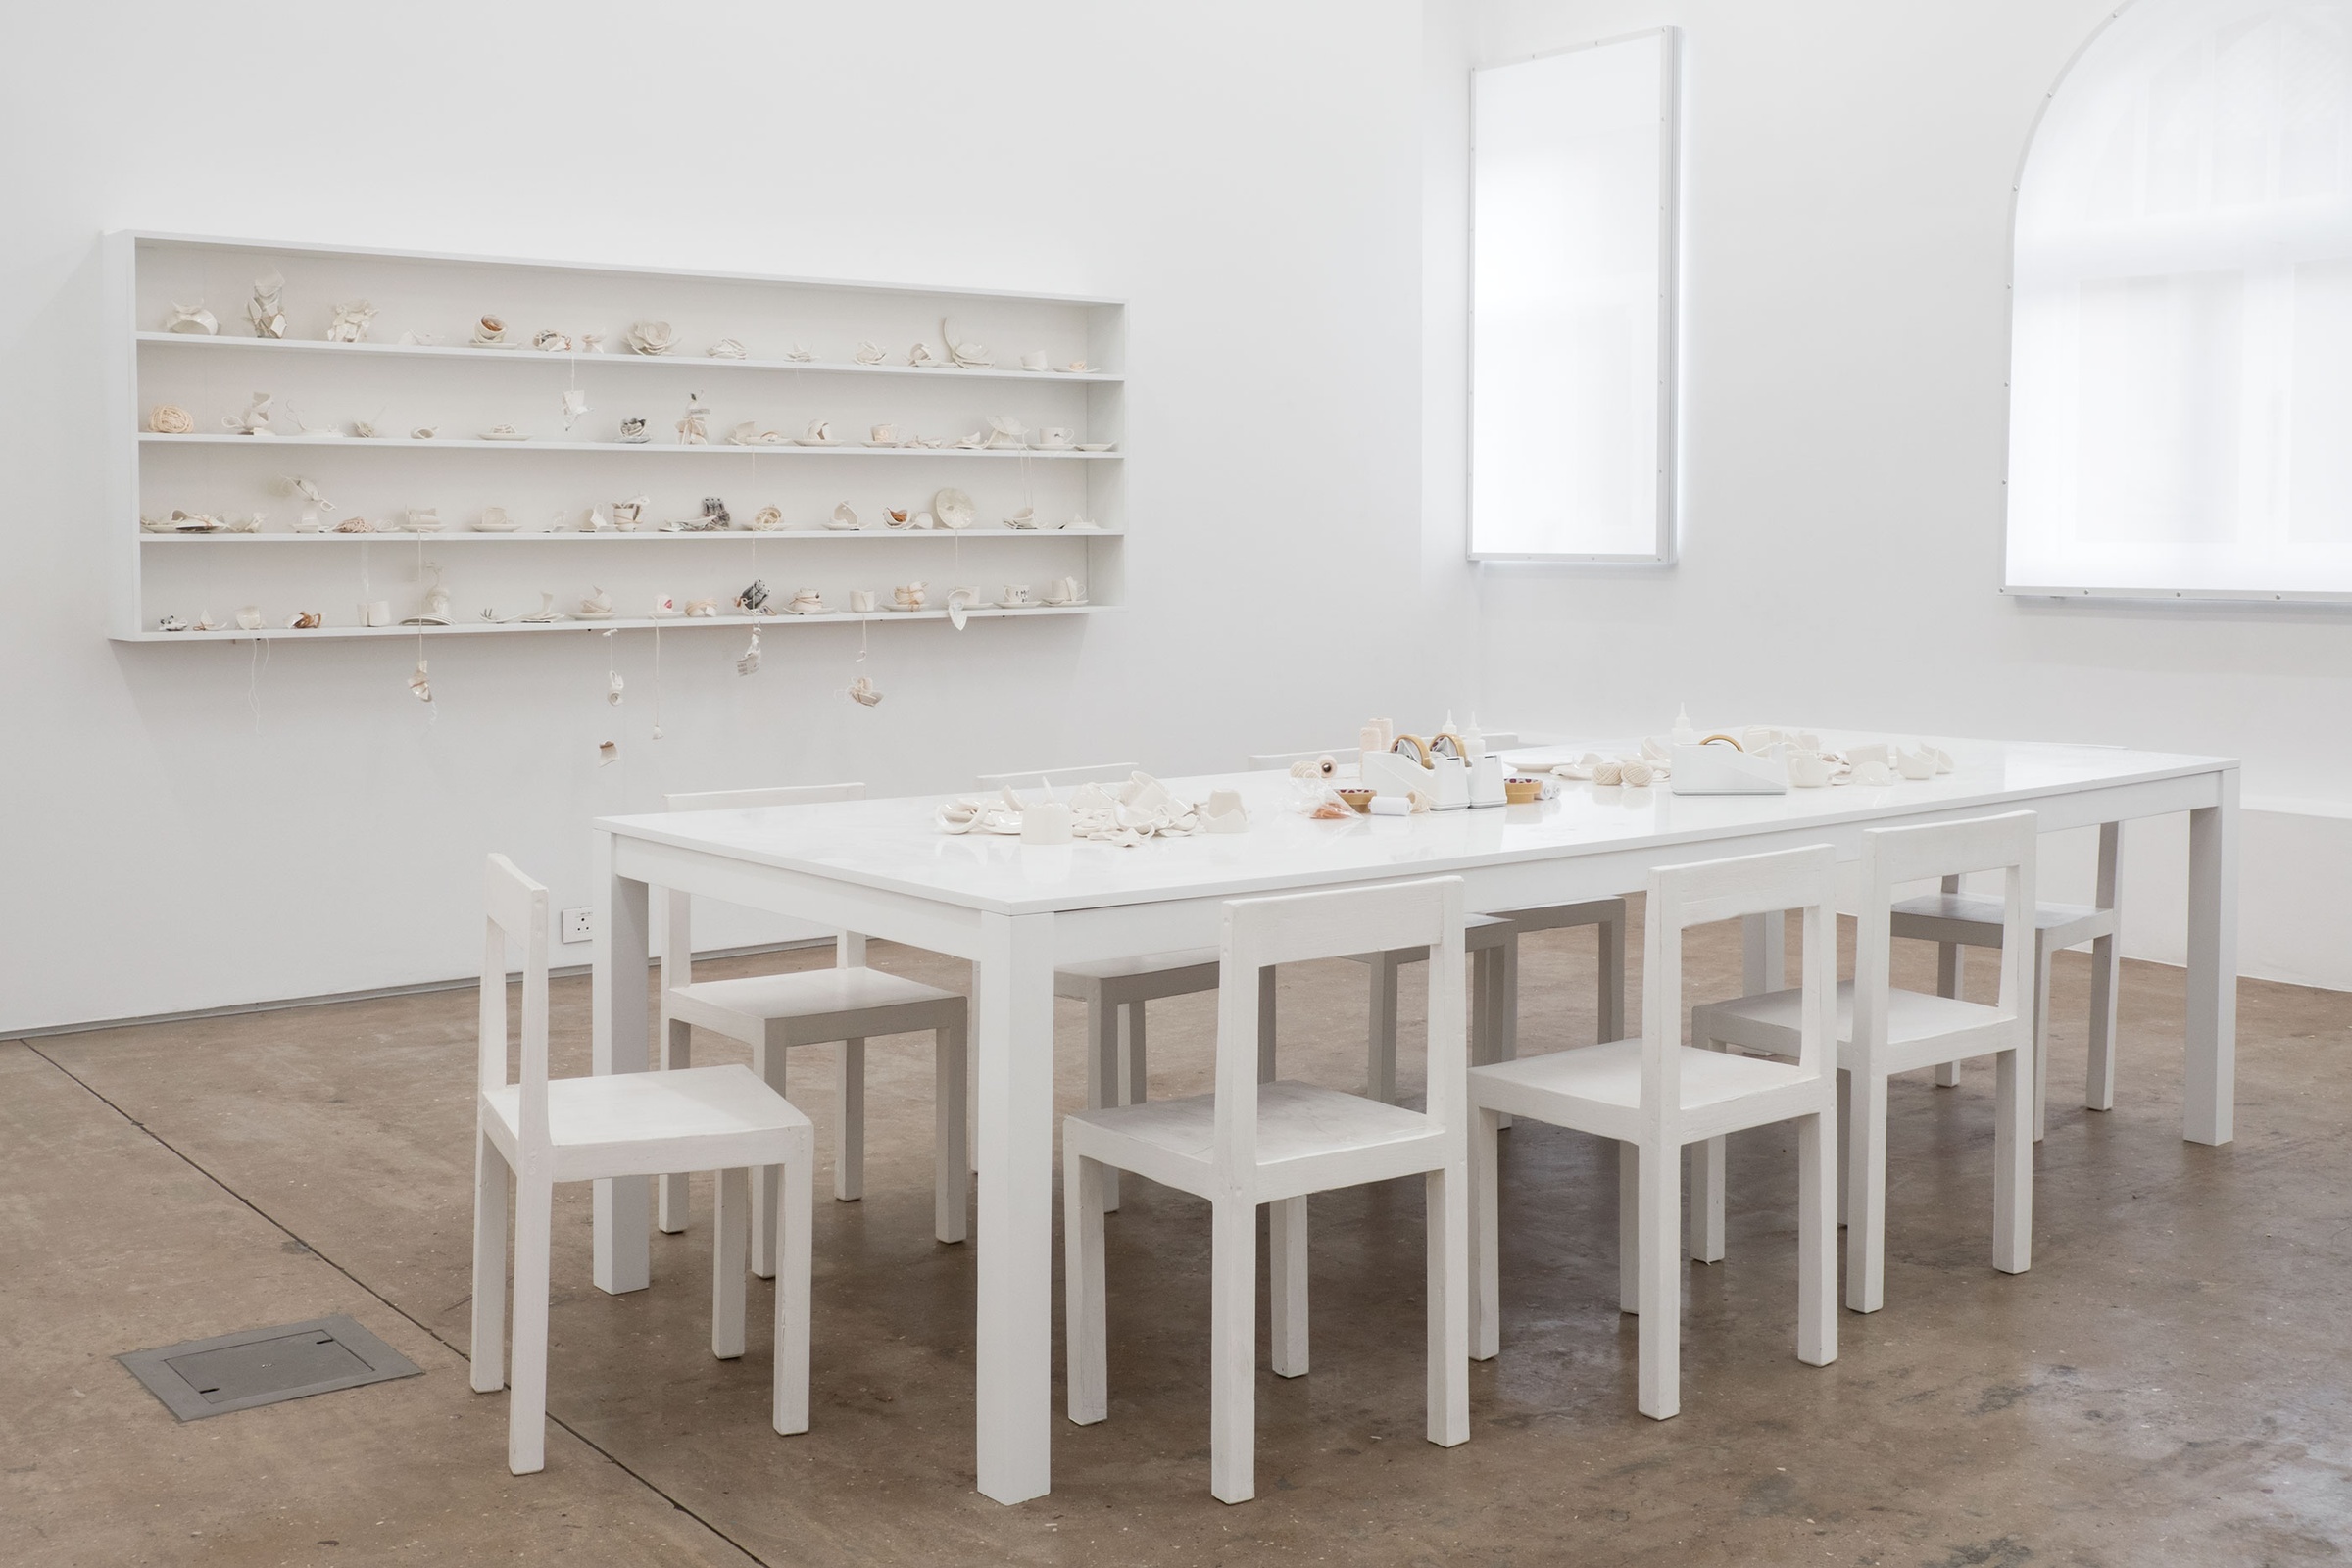 An installation photograph of Yoko Ono's installation 'MEND PIECE, Andrea Rosen Gallery, New York City version'. At the front, a white table surrounded by chairs holds ceramic fragments, glue, tape, scissors and twine. At the back, a white wall-mounted shelf holds pieces constructed by participants.
